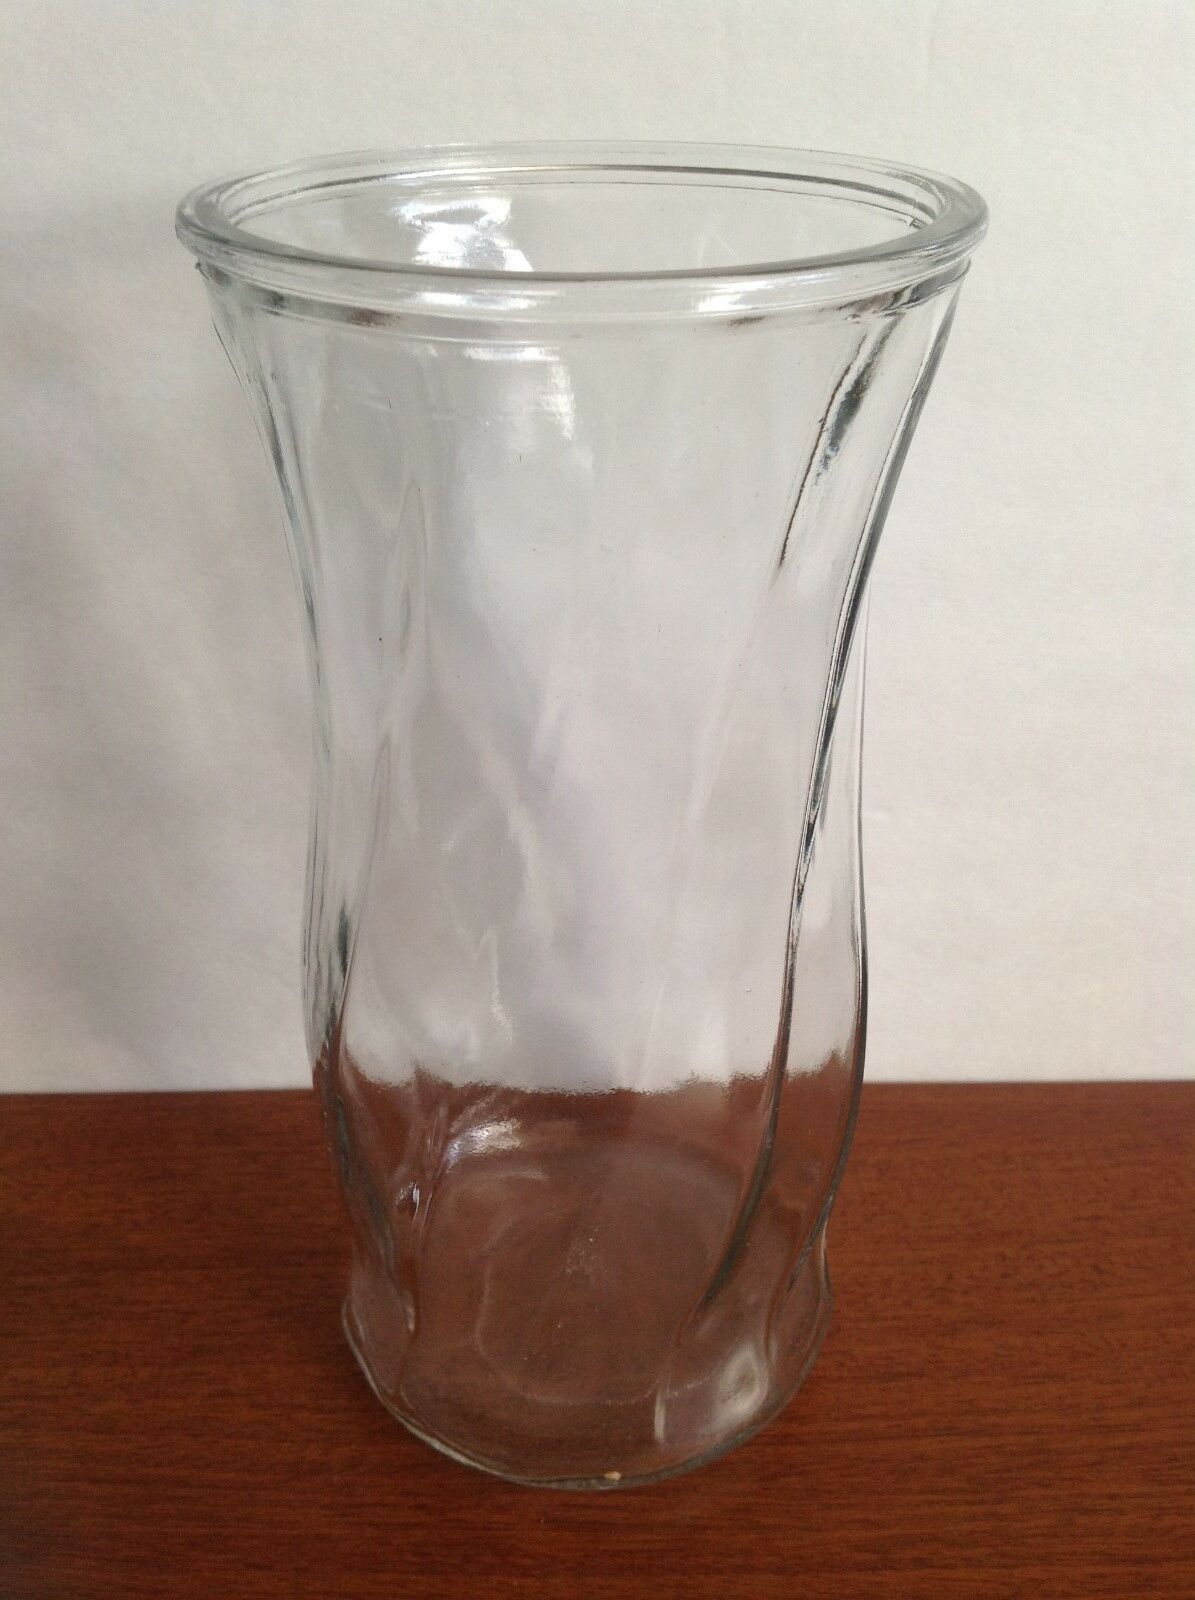 Brody Co. Large Round Glass Vase 9 1/2" Tall Ribbed Pattern C973